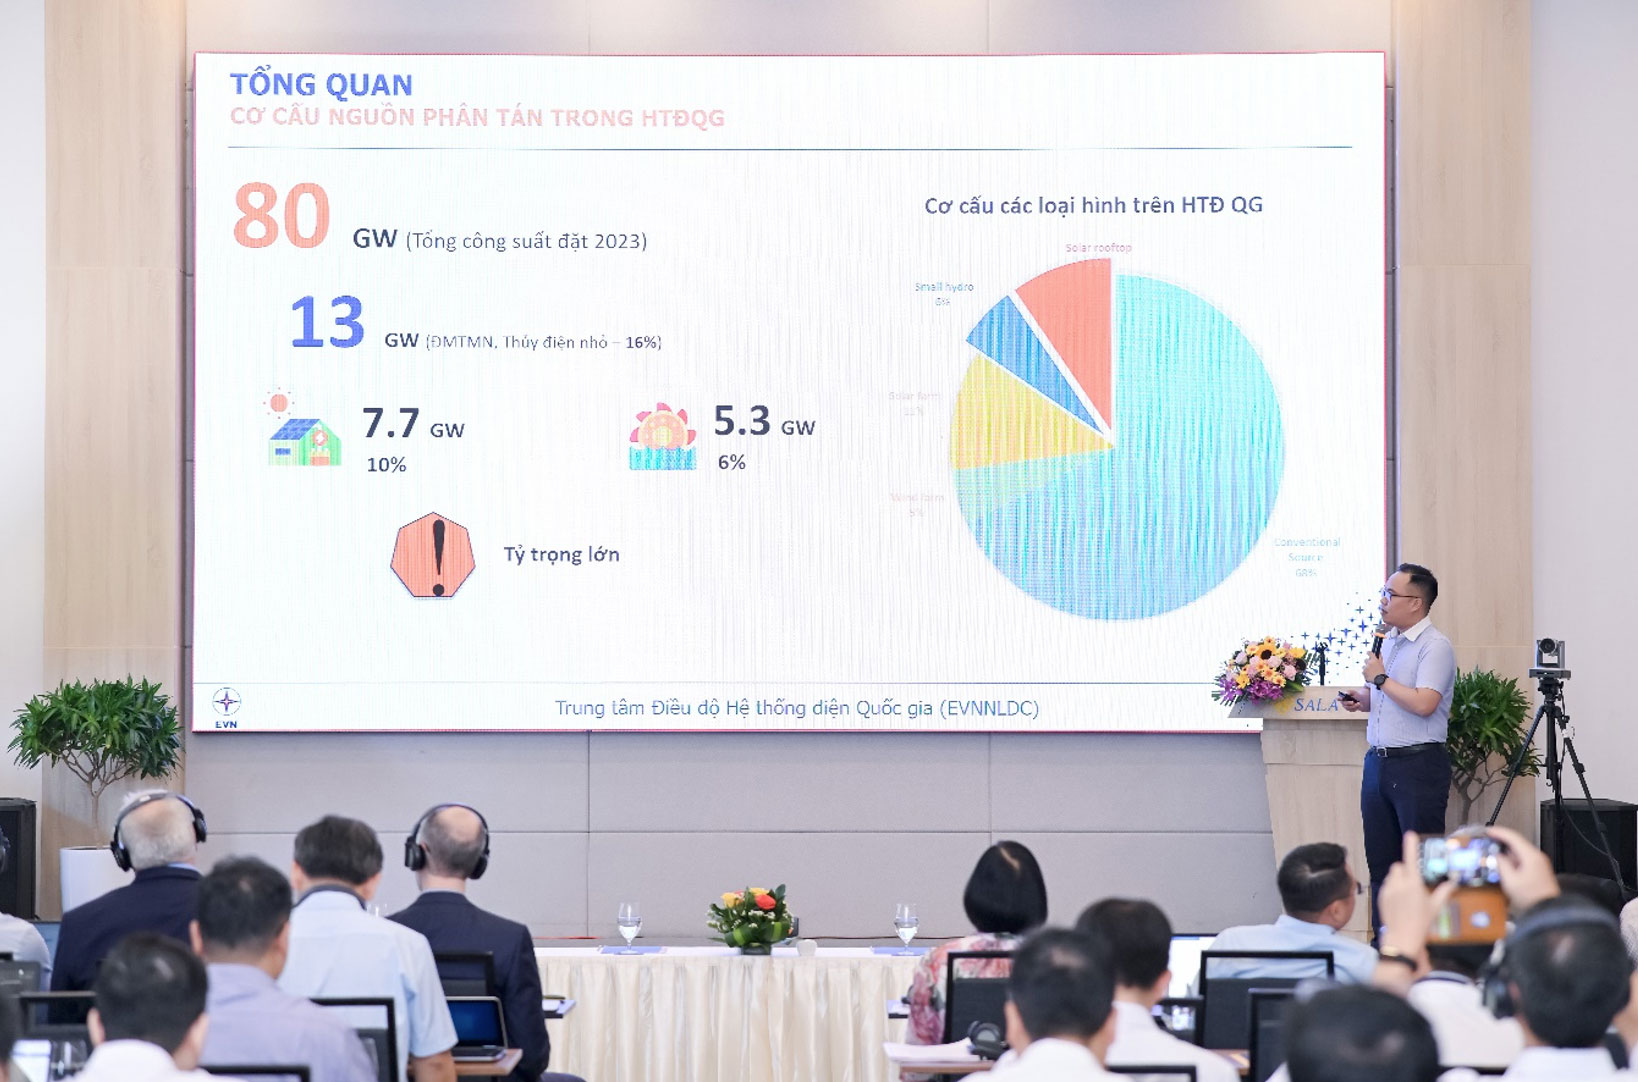 A representative of Viet Nam’s National Load Dispatch Center presented an overview of distributed energy sources in the country’s power system at one of CIRTS’ event in August 2023.